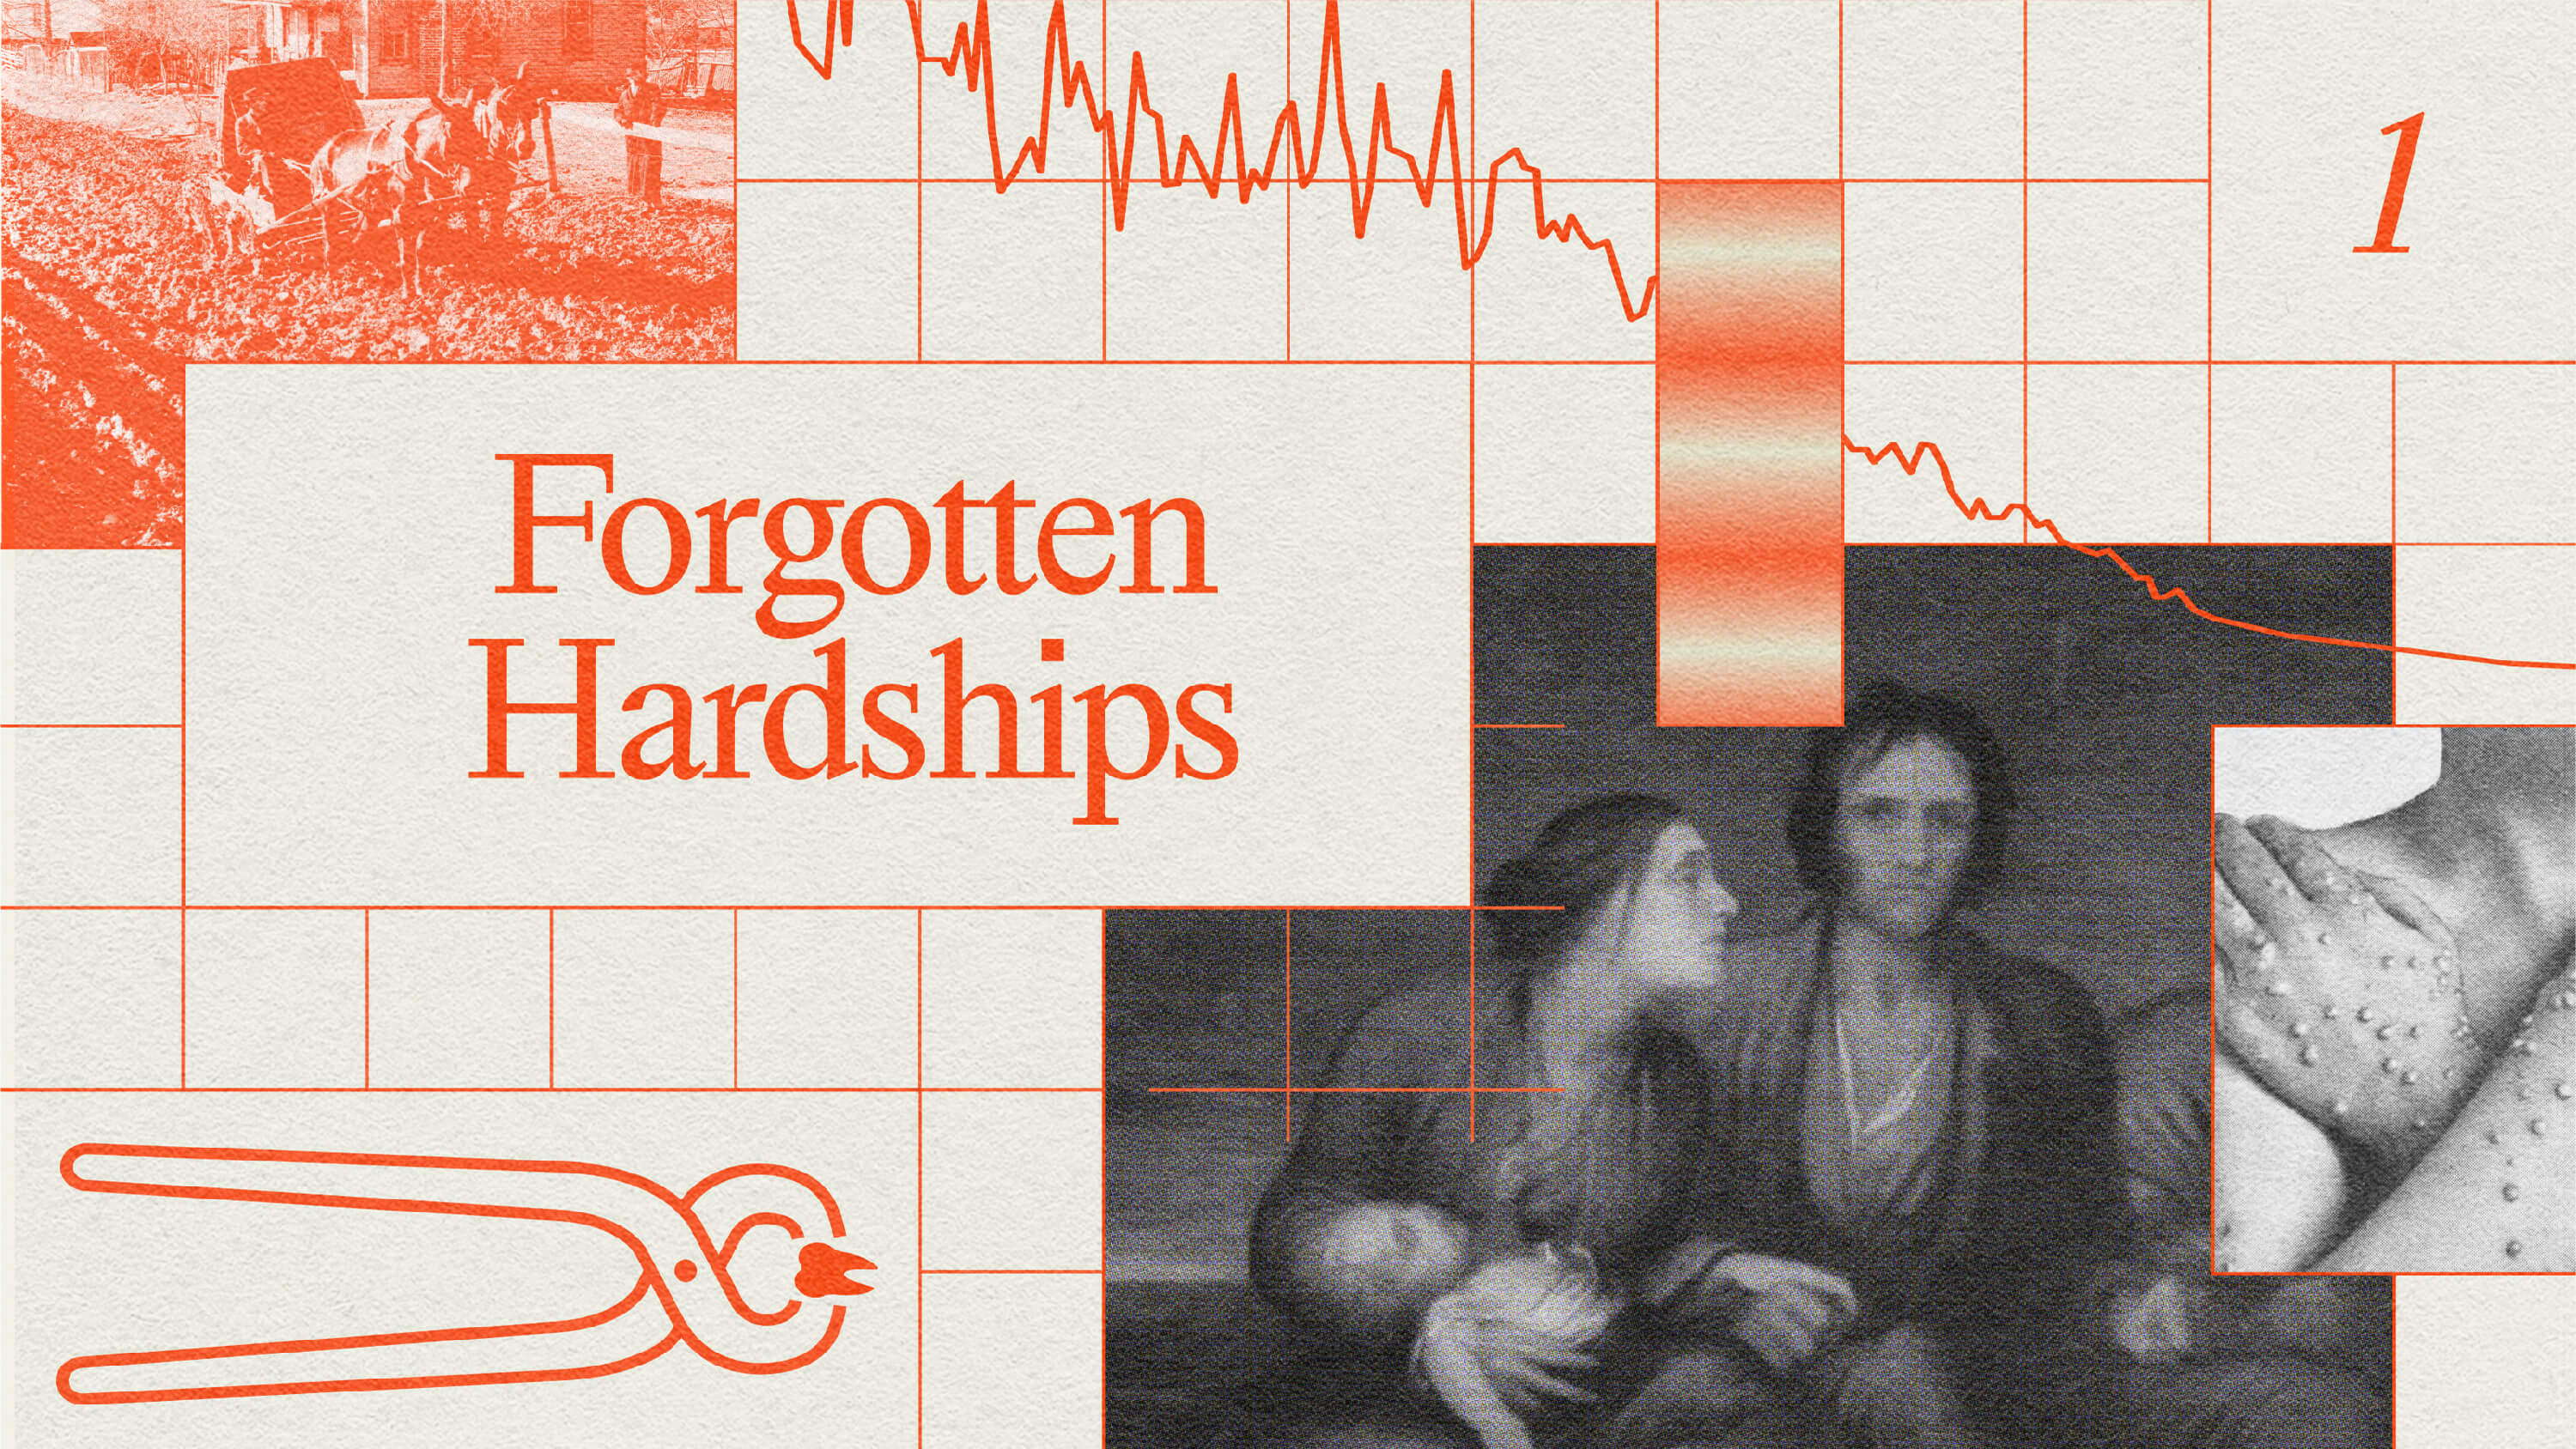 A collage featuring the text "Forgotten Hardships," images of a struggling family, a graph, a historical farming scene, hands with a skin condition, and an illustration of a caliper.